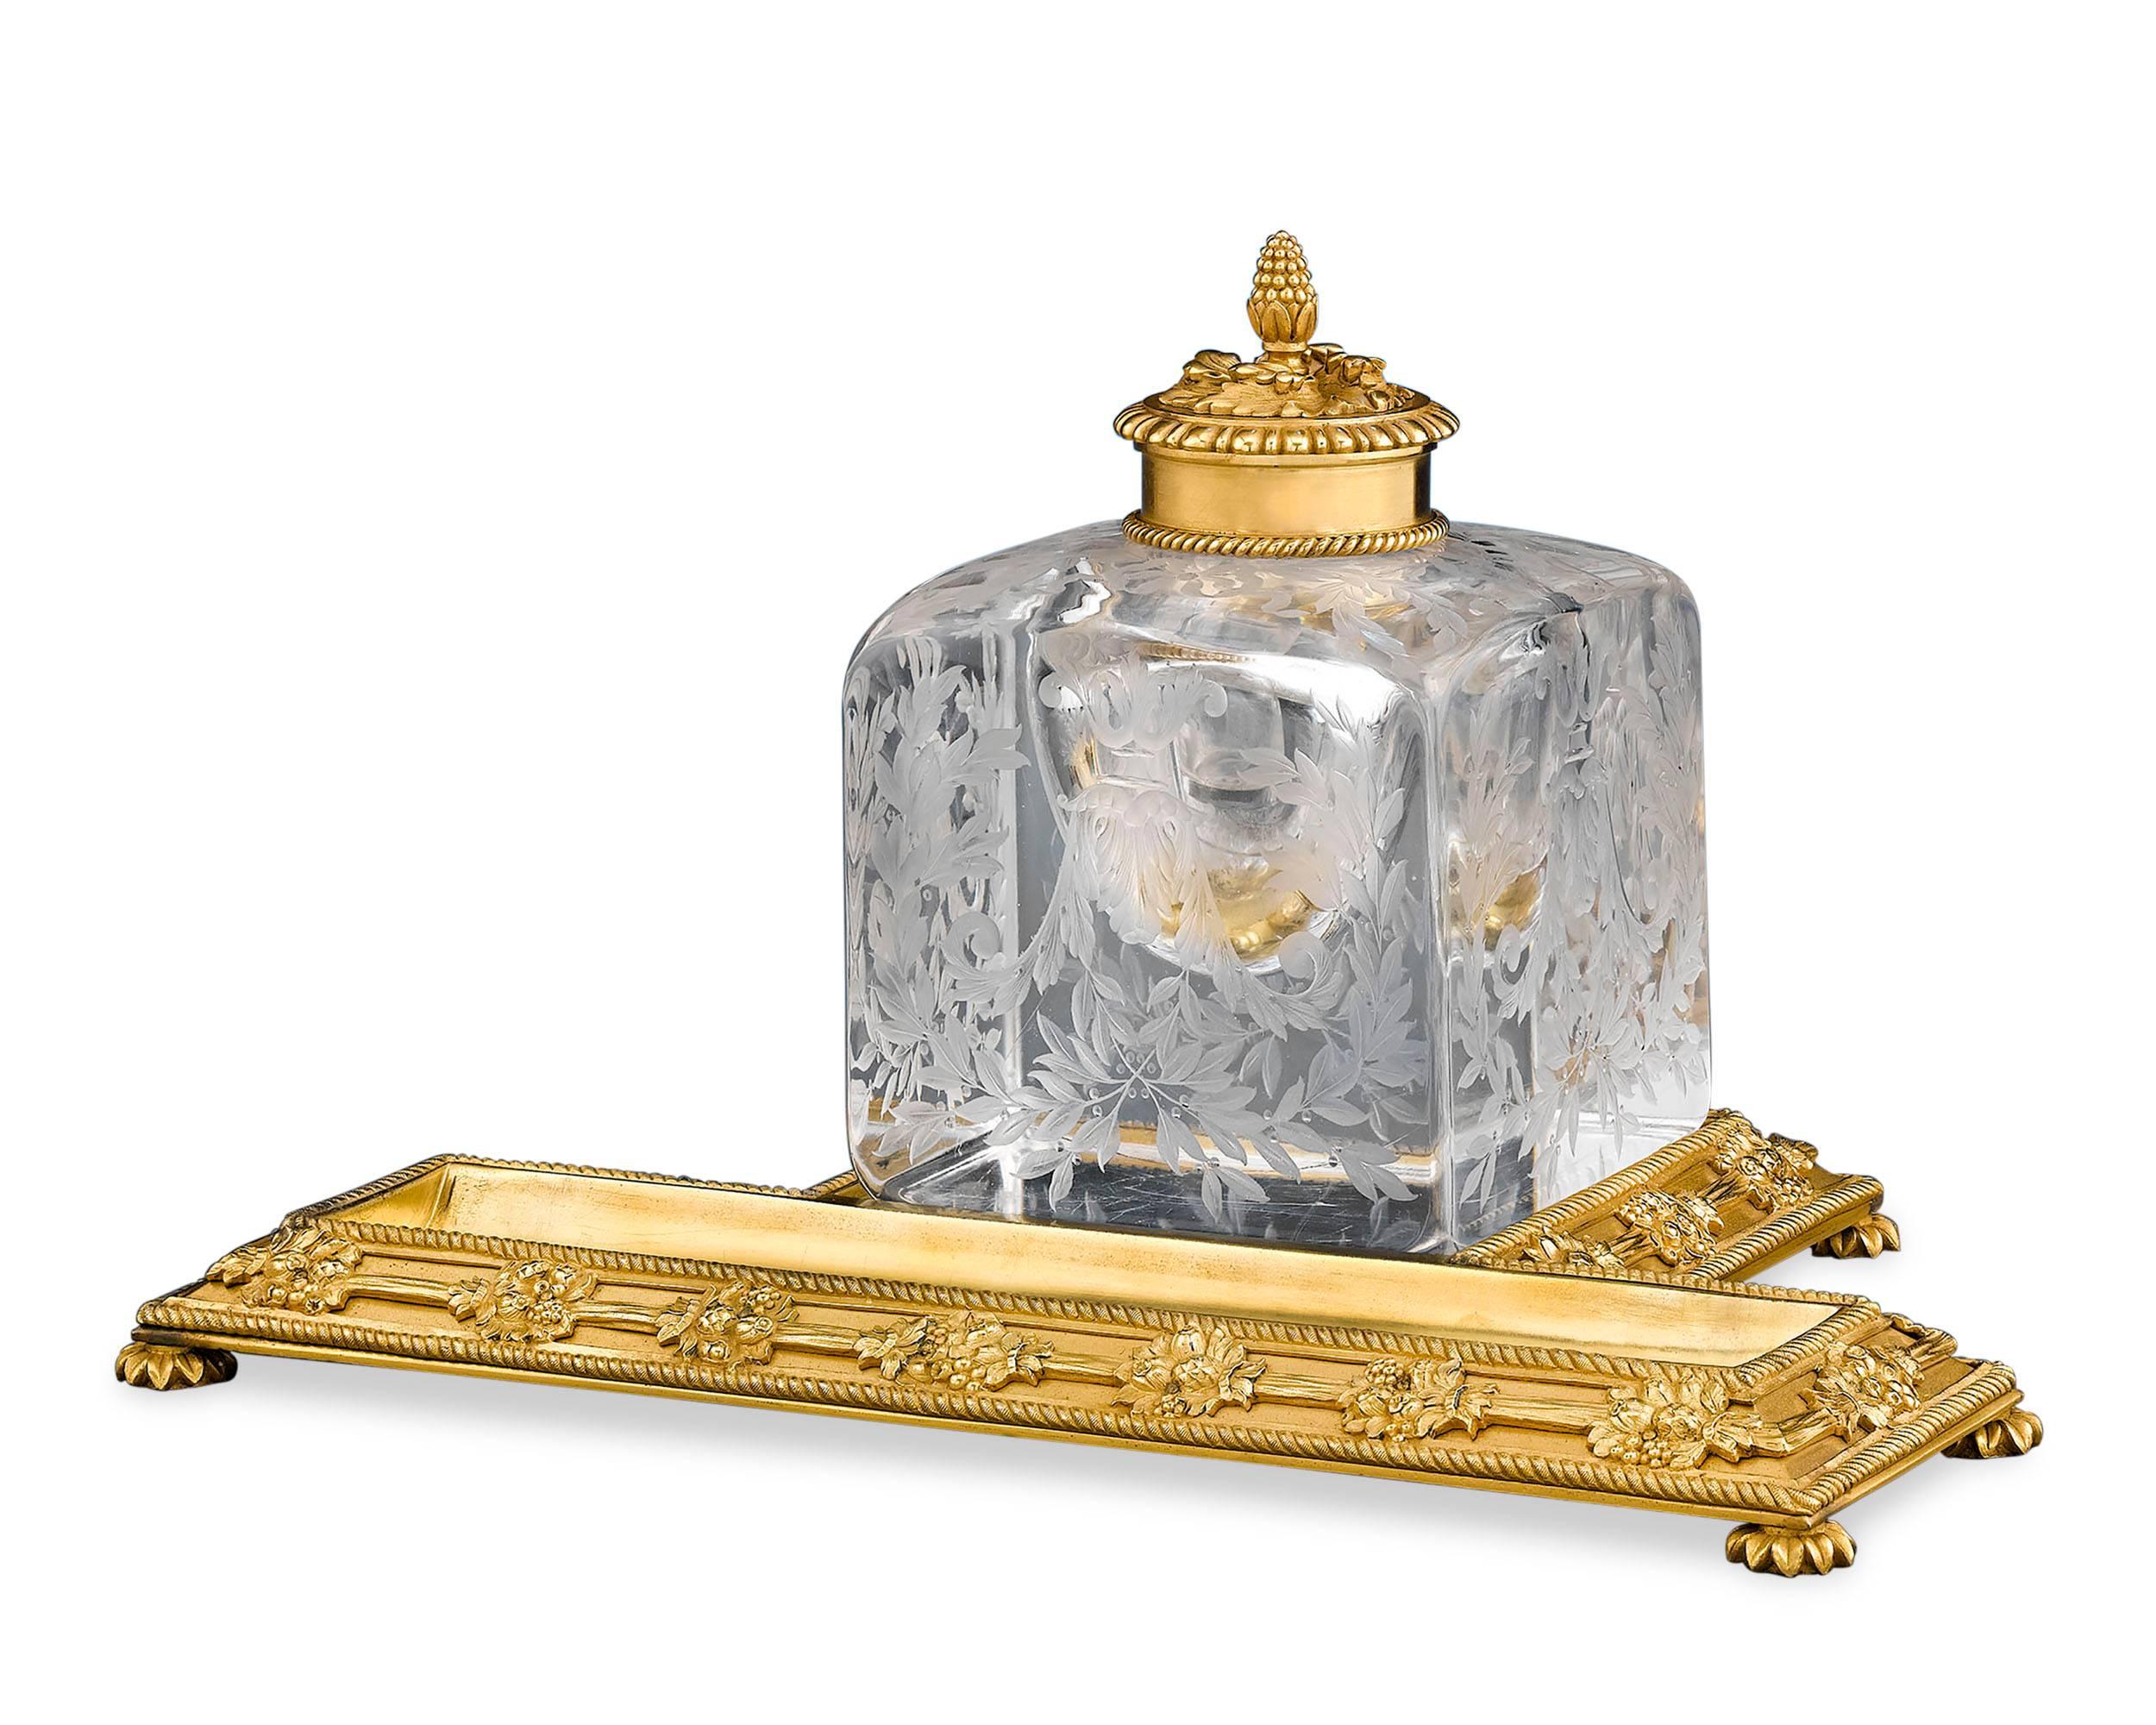 A work of impeccable beauty, this gilt bronze and glass inkwell Standish embodies the best of the Napoleon III style. Comprised of a beautifully etched, solid glass inkwell set upon an ormolu stand decorated with foliage and gadrooned feet, this